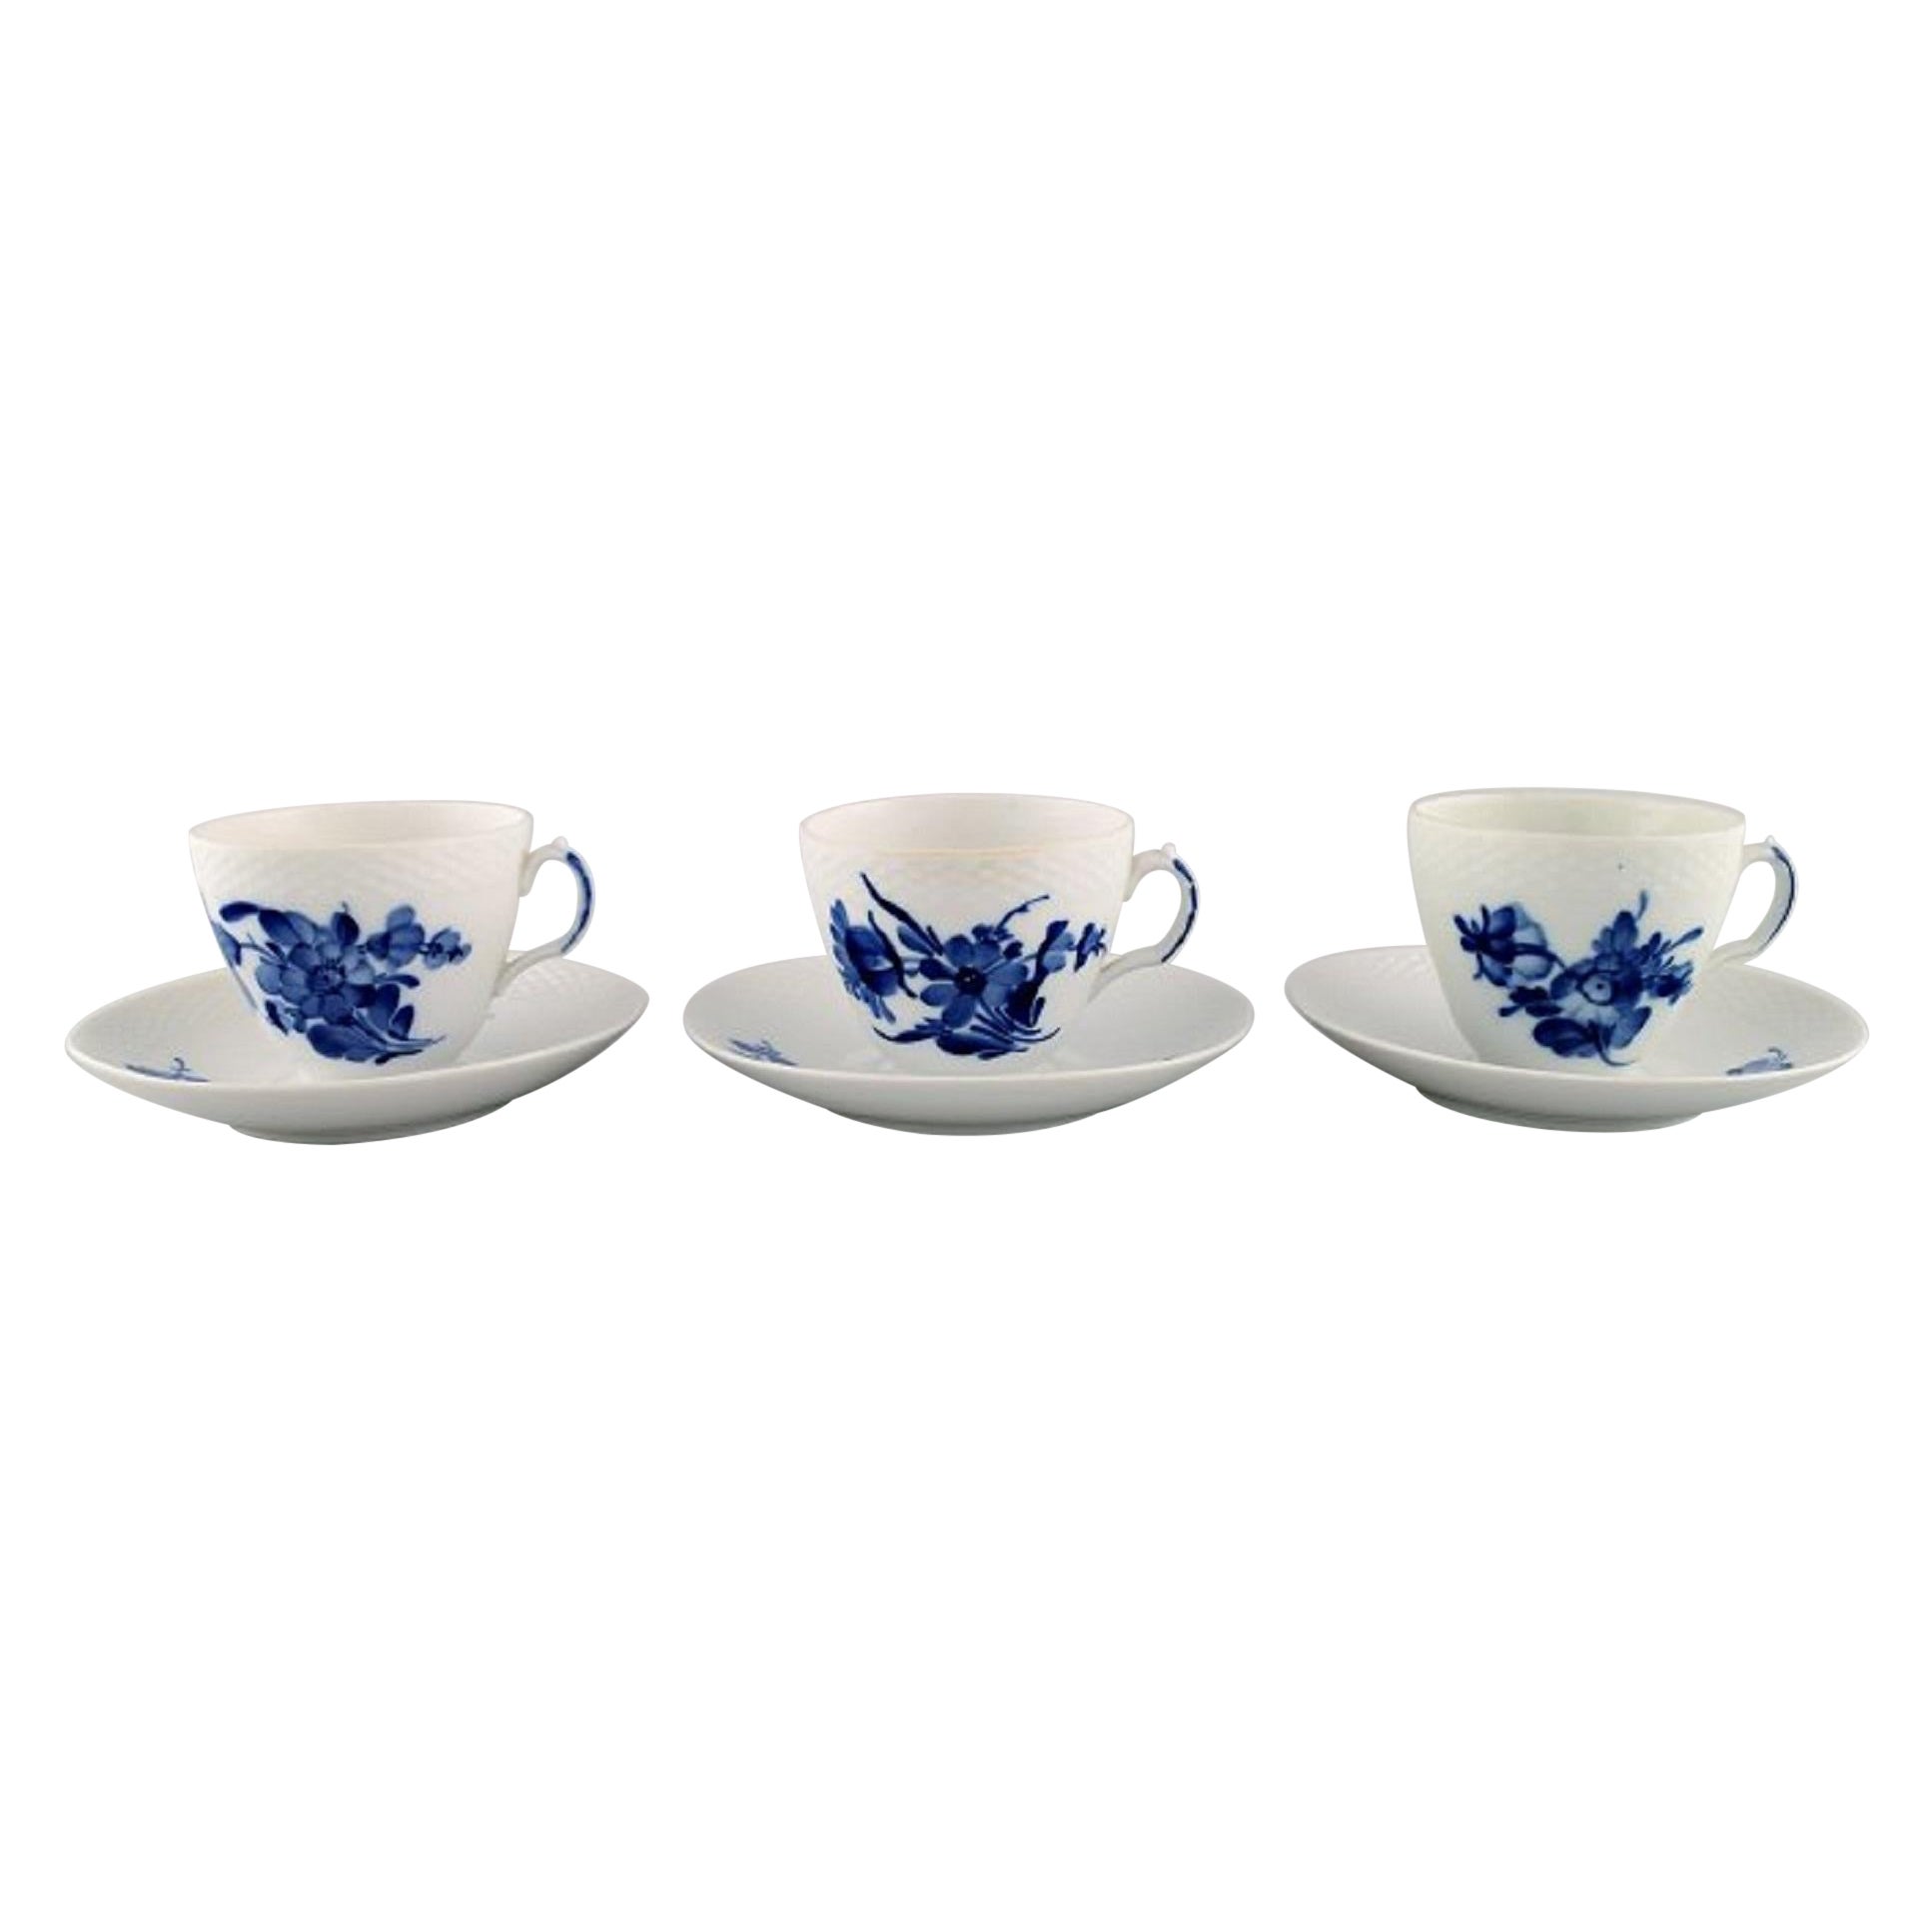 Three Royal Copenhagen Blue Flower Braided Coffee Cups with Saucers, 1950s